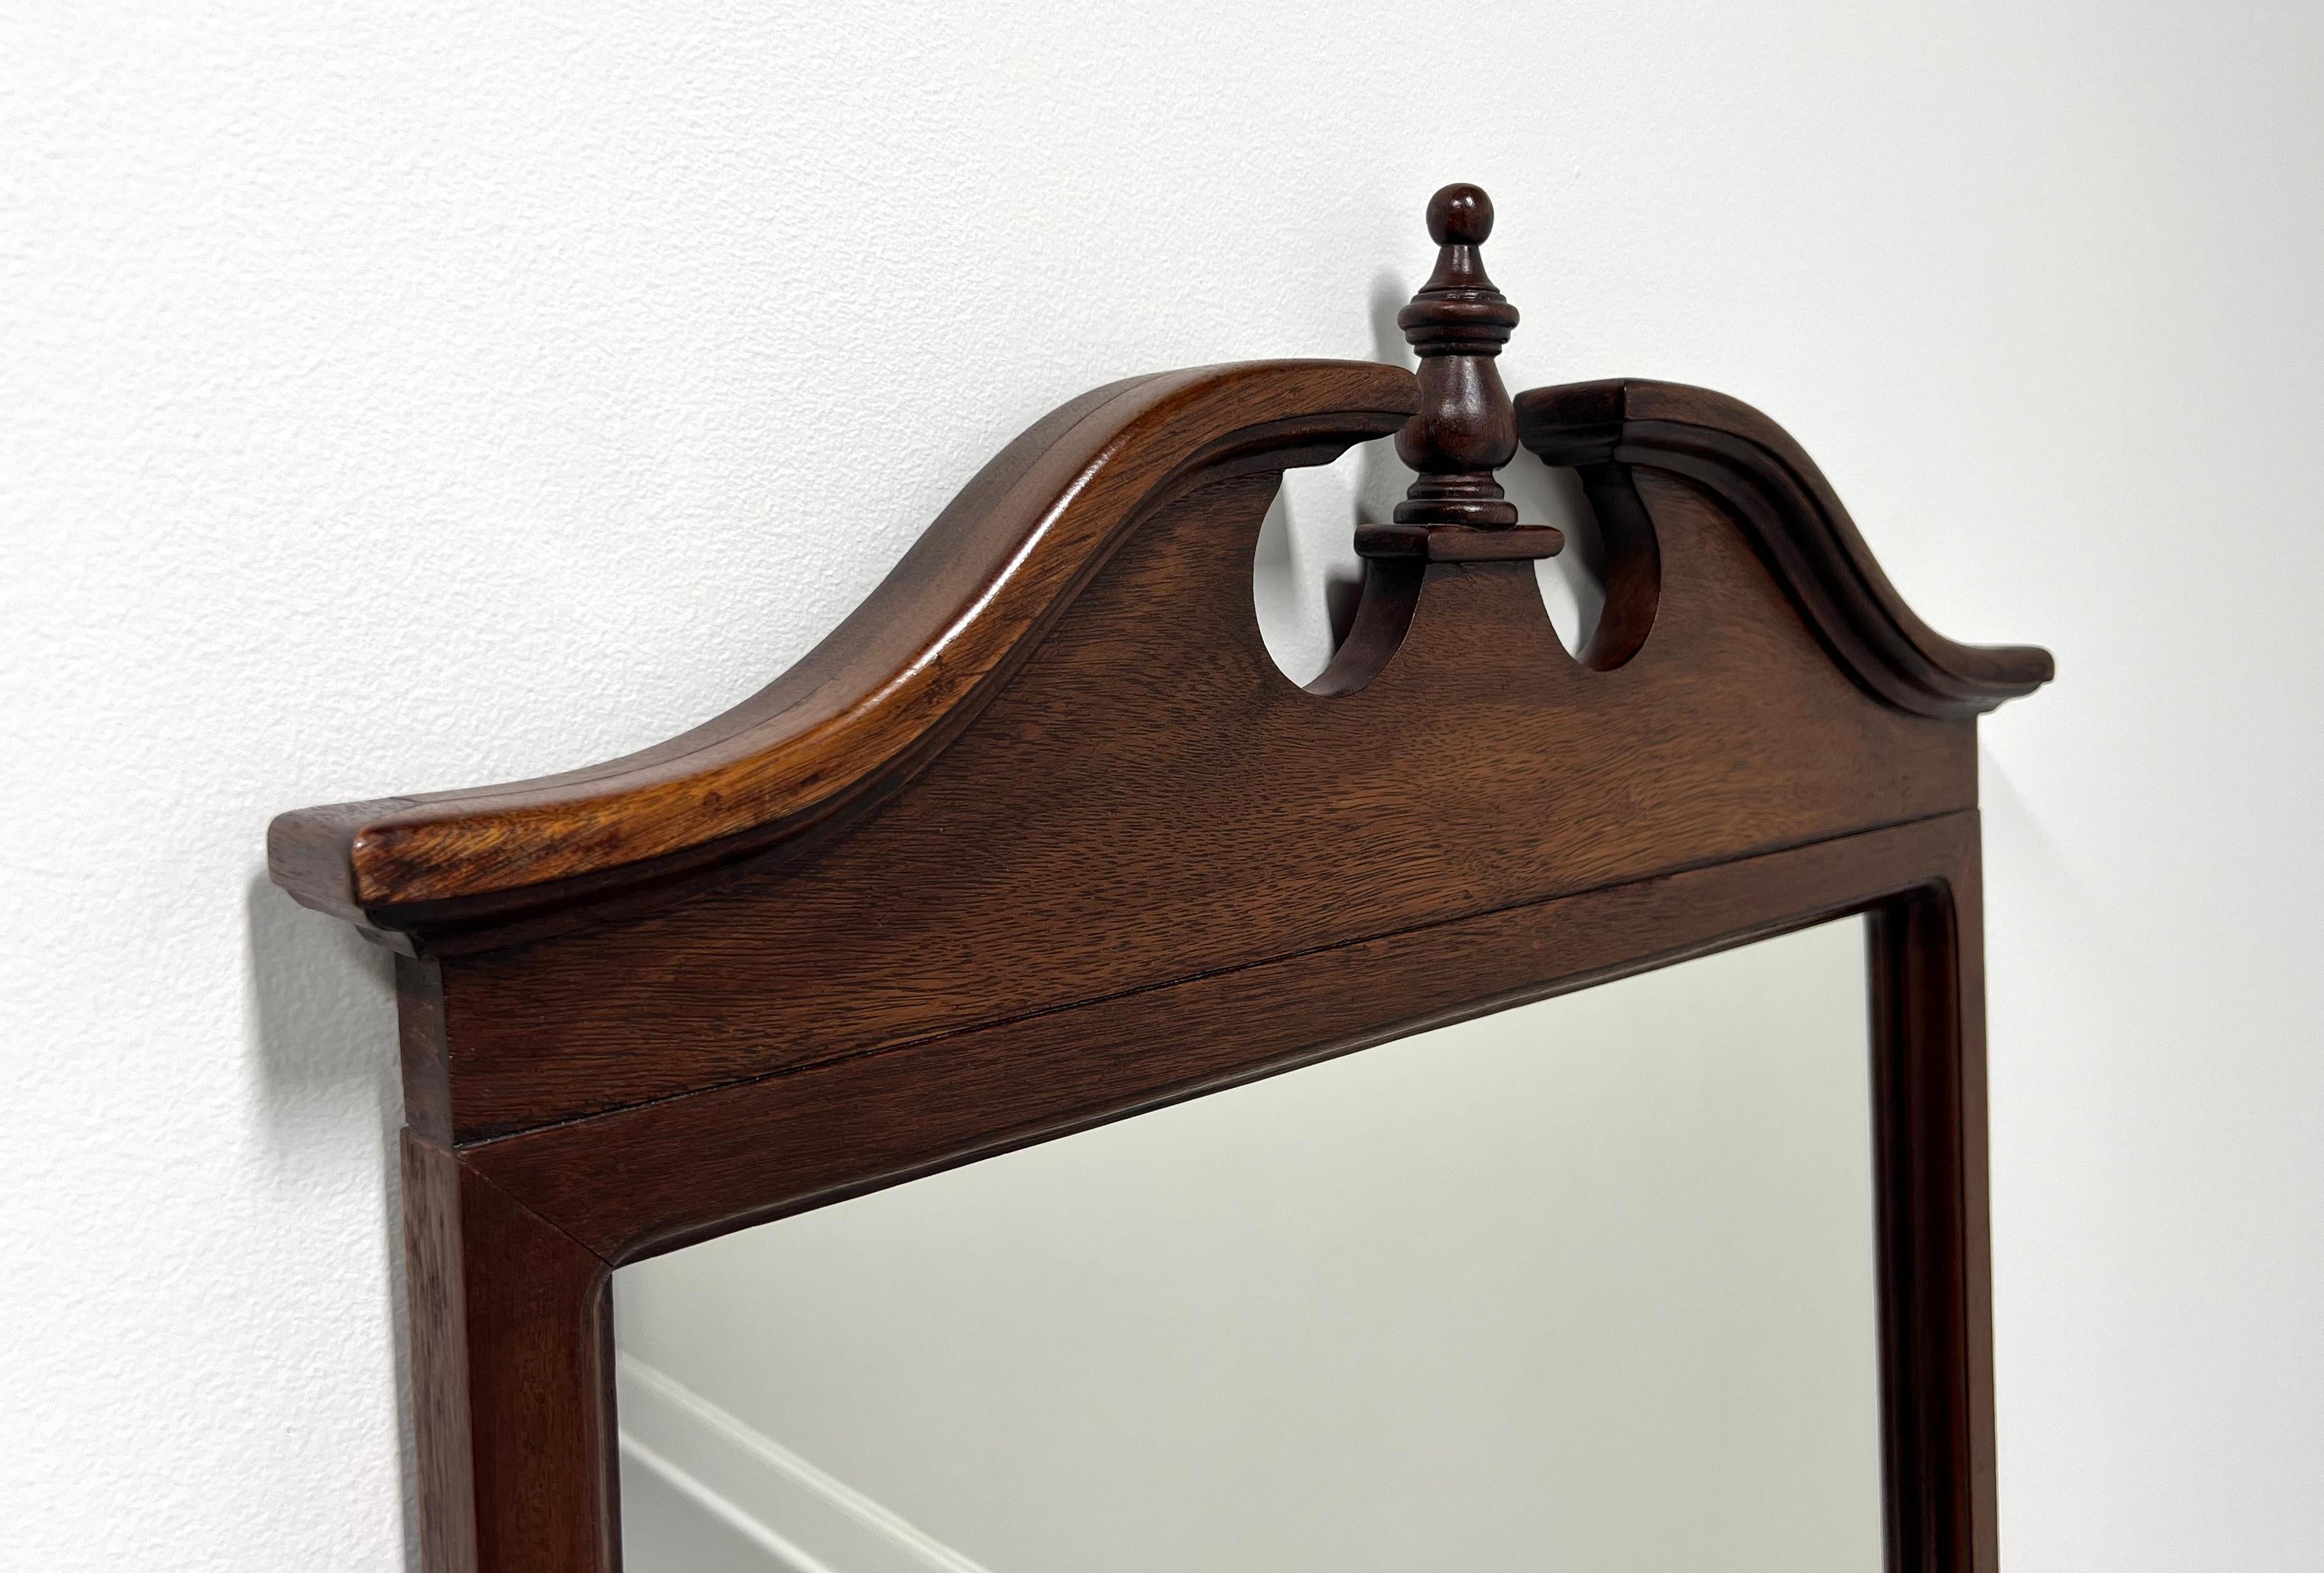 A Traditional Federal style wall mirror, unbranded, similar quality to Drexel or Lexington. Mirrored glass, mahogany frame with pediment and center finial to top. Made in the USA, in the mid 20th Century.

Measures:  24.75w 1.75d 45.5h, Weighs